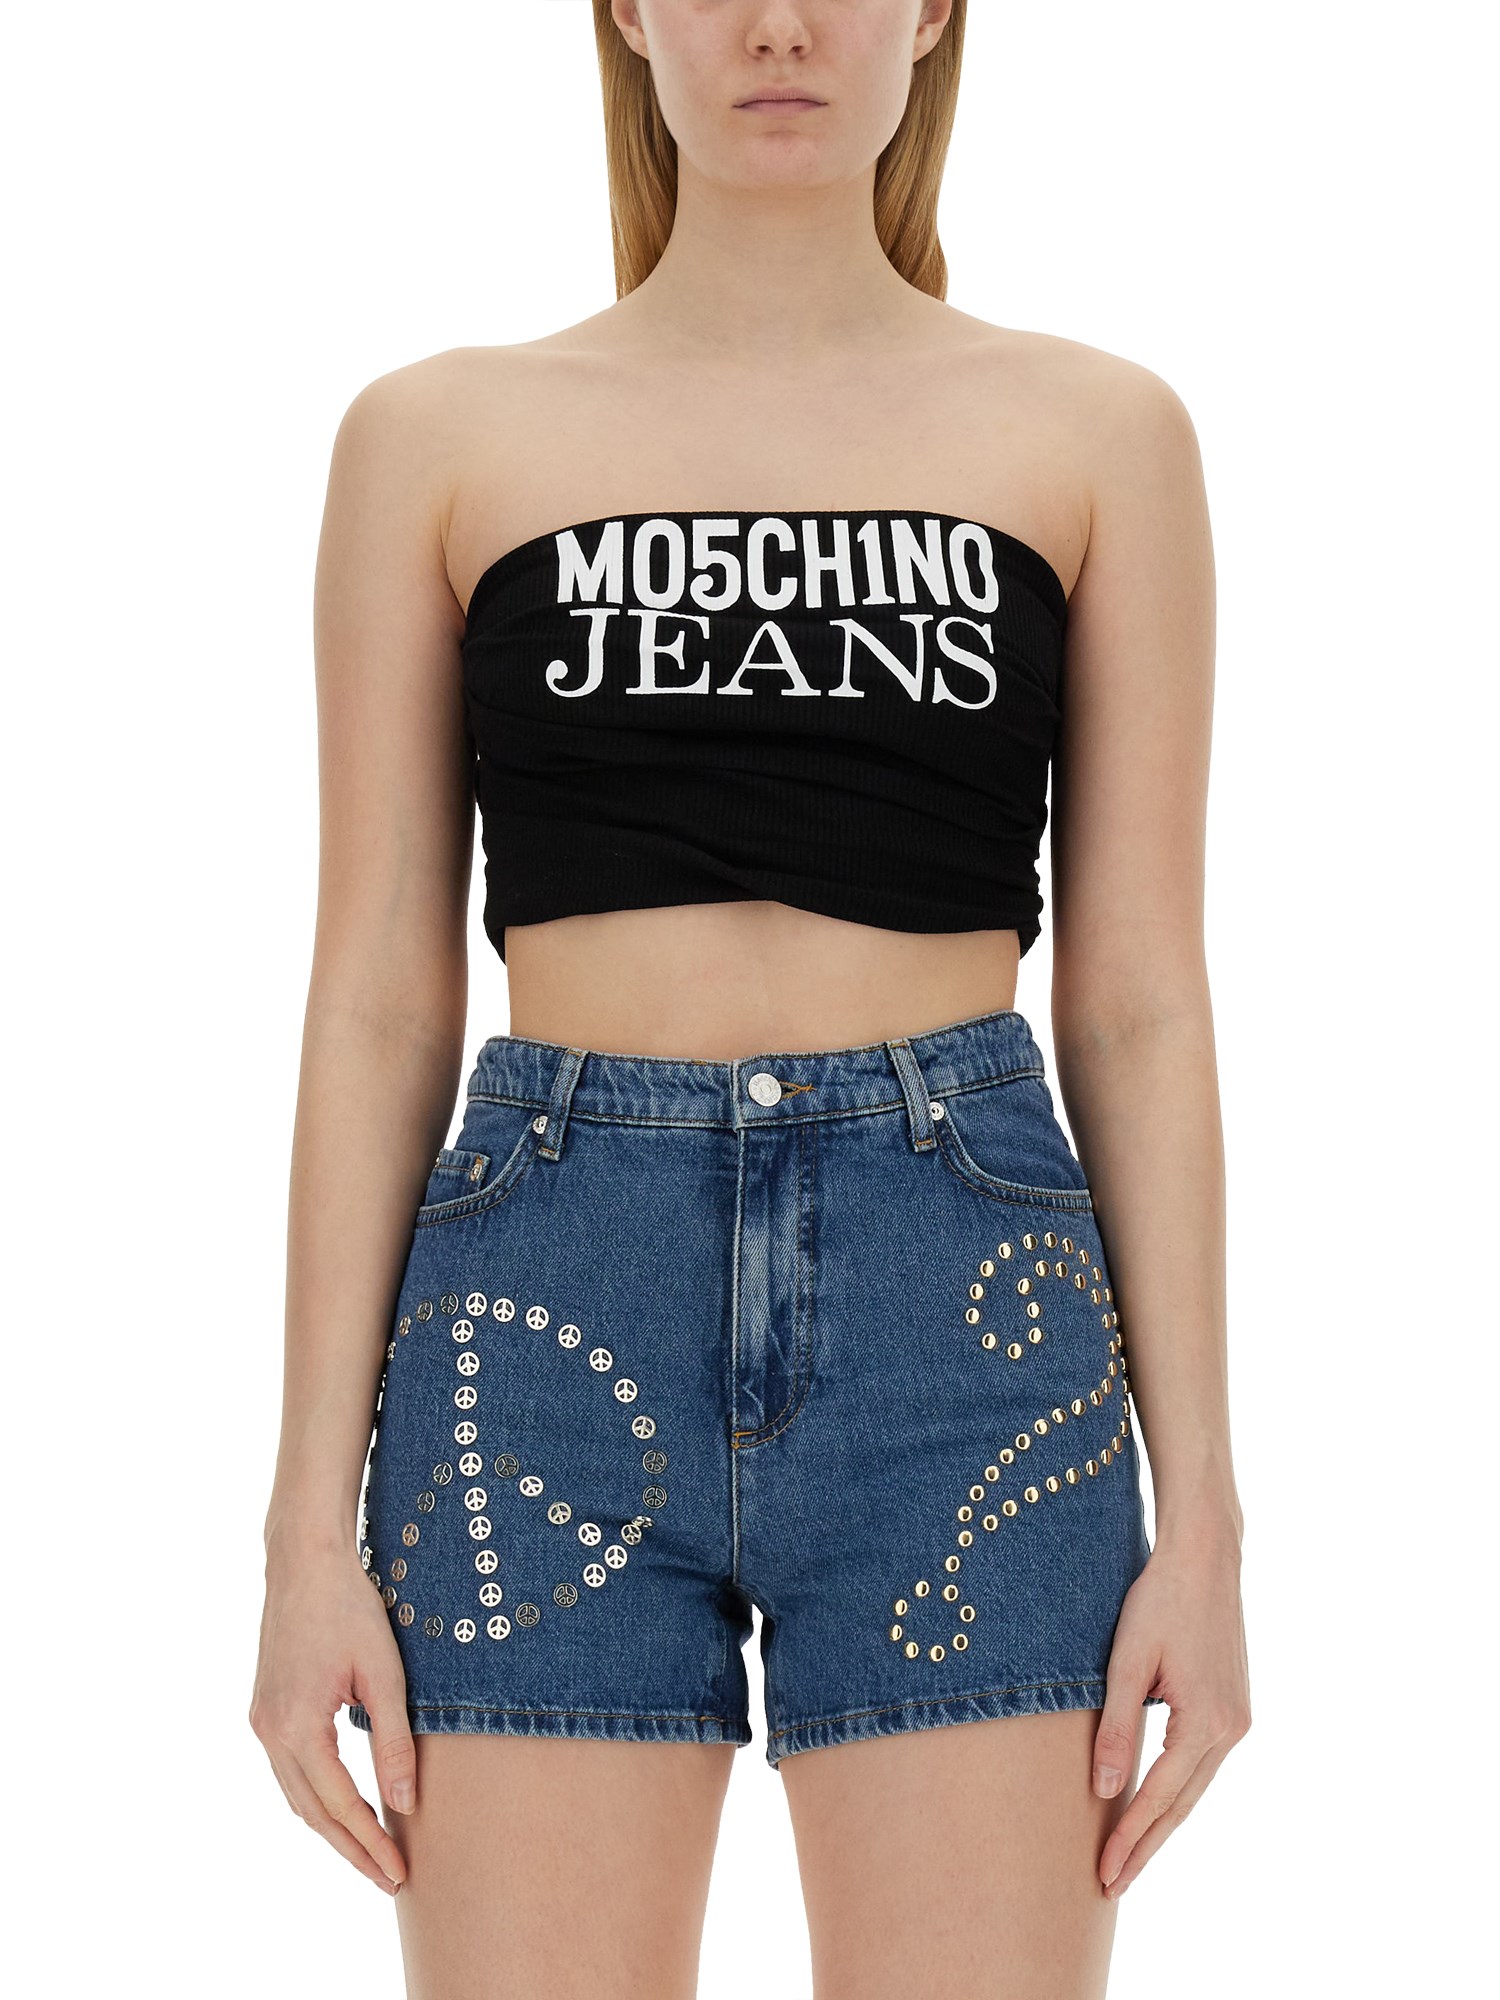 Moschino Jeans moschino jeans tops with logo